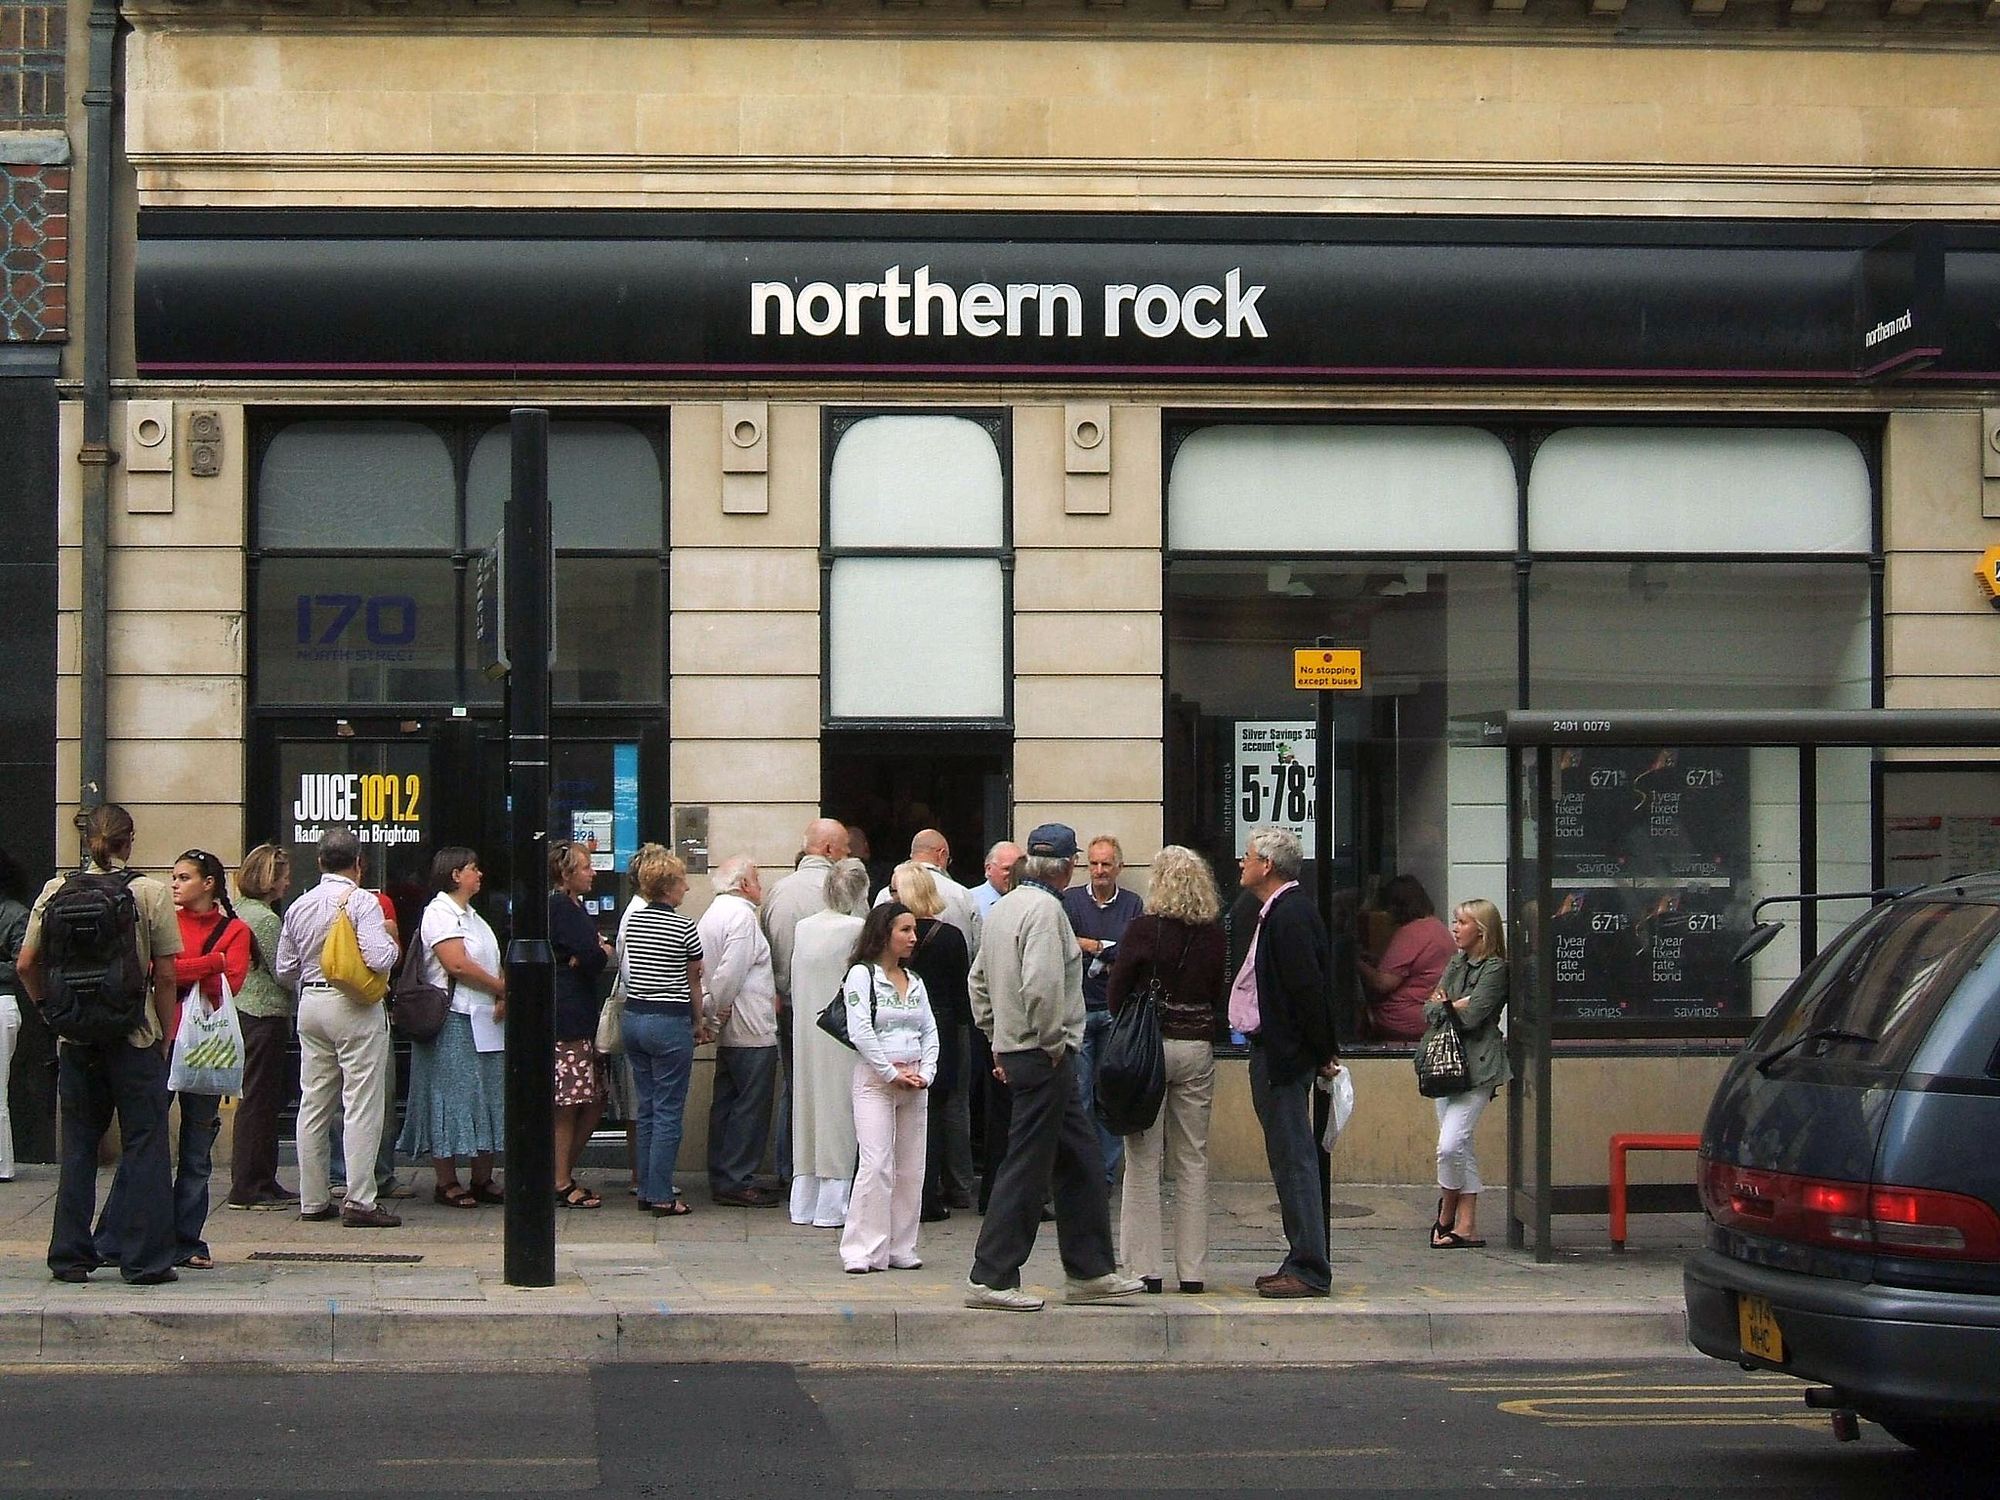 Small line of customers (presumably anxious investors and savers) outside a branch of Northern Rock - a Mortgage specialist and a top UK mortgage lender - in North Street, Brighton, East Sussex. The business (a former "savings and loan" type Building Society which was demutualised in 1997) has been affected in part by problems in the US "subprime" lending market.